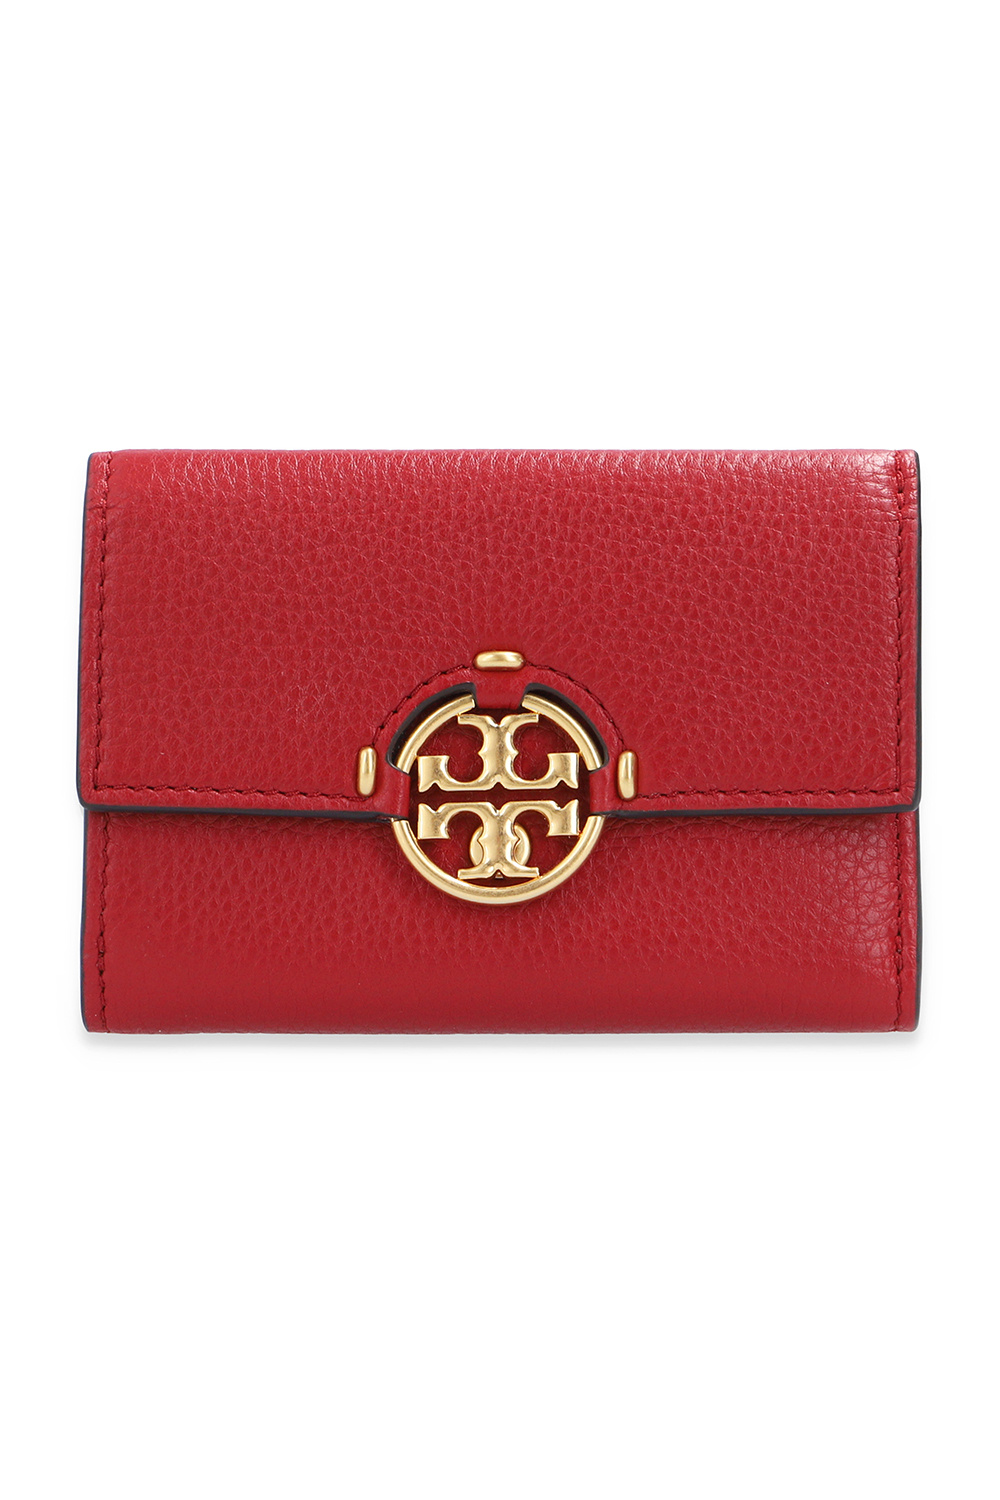 Red Wallet with logo Tory Burch - Vitkac Canada